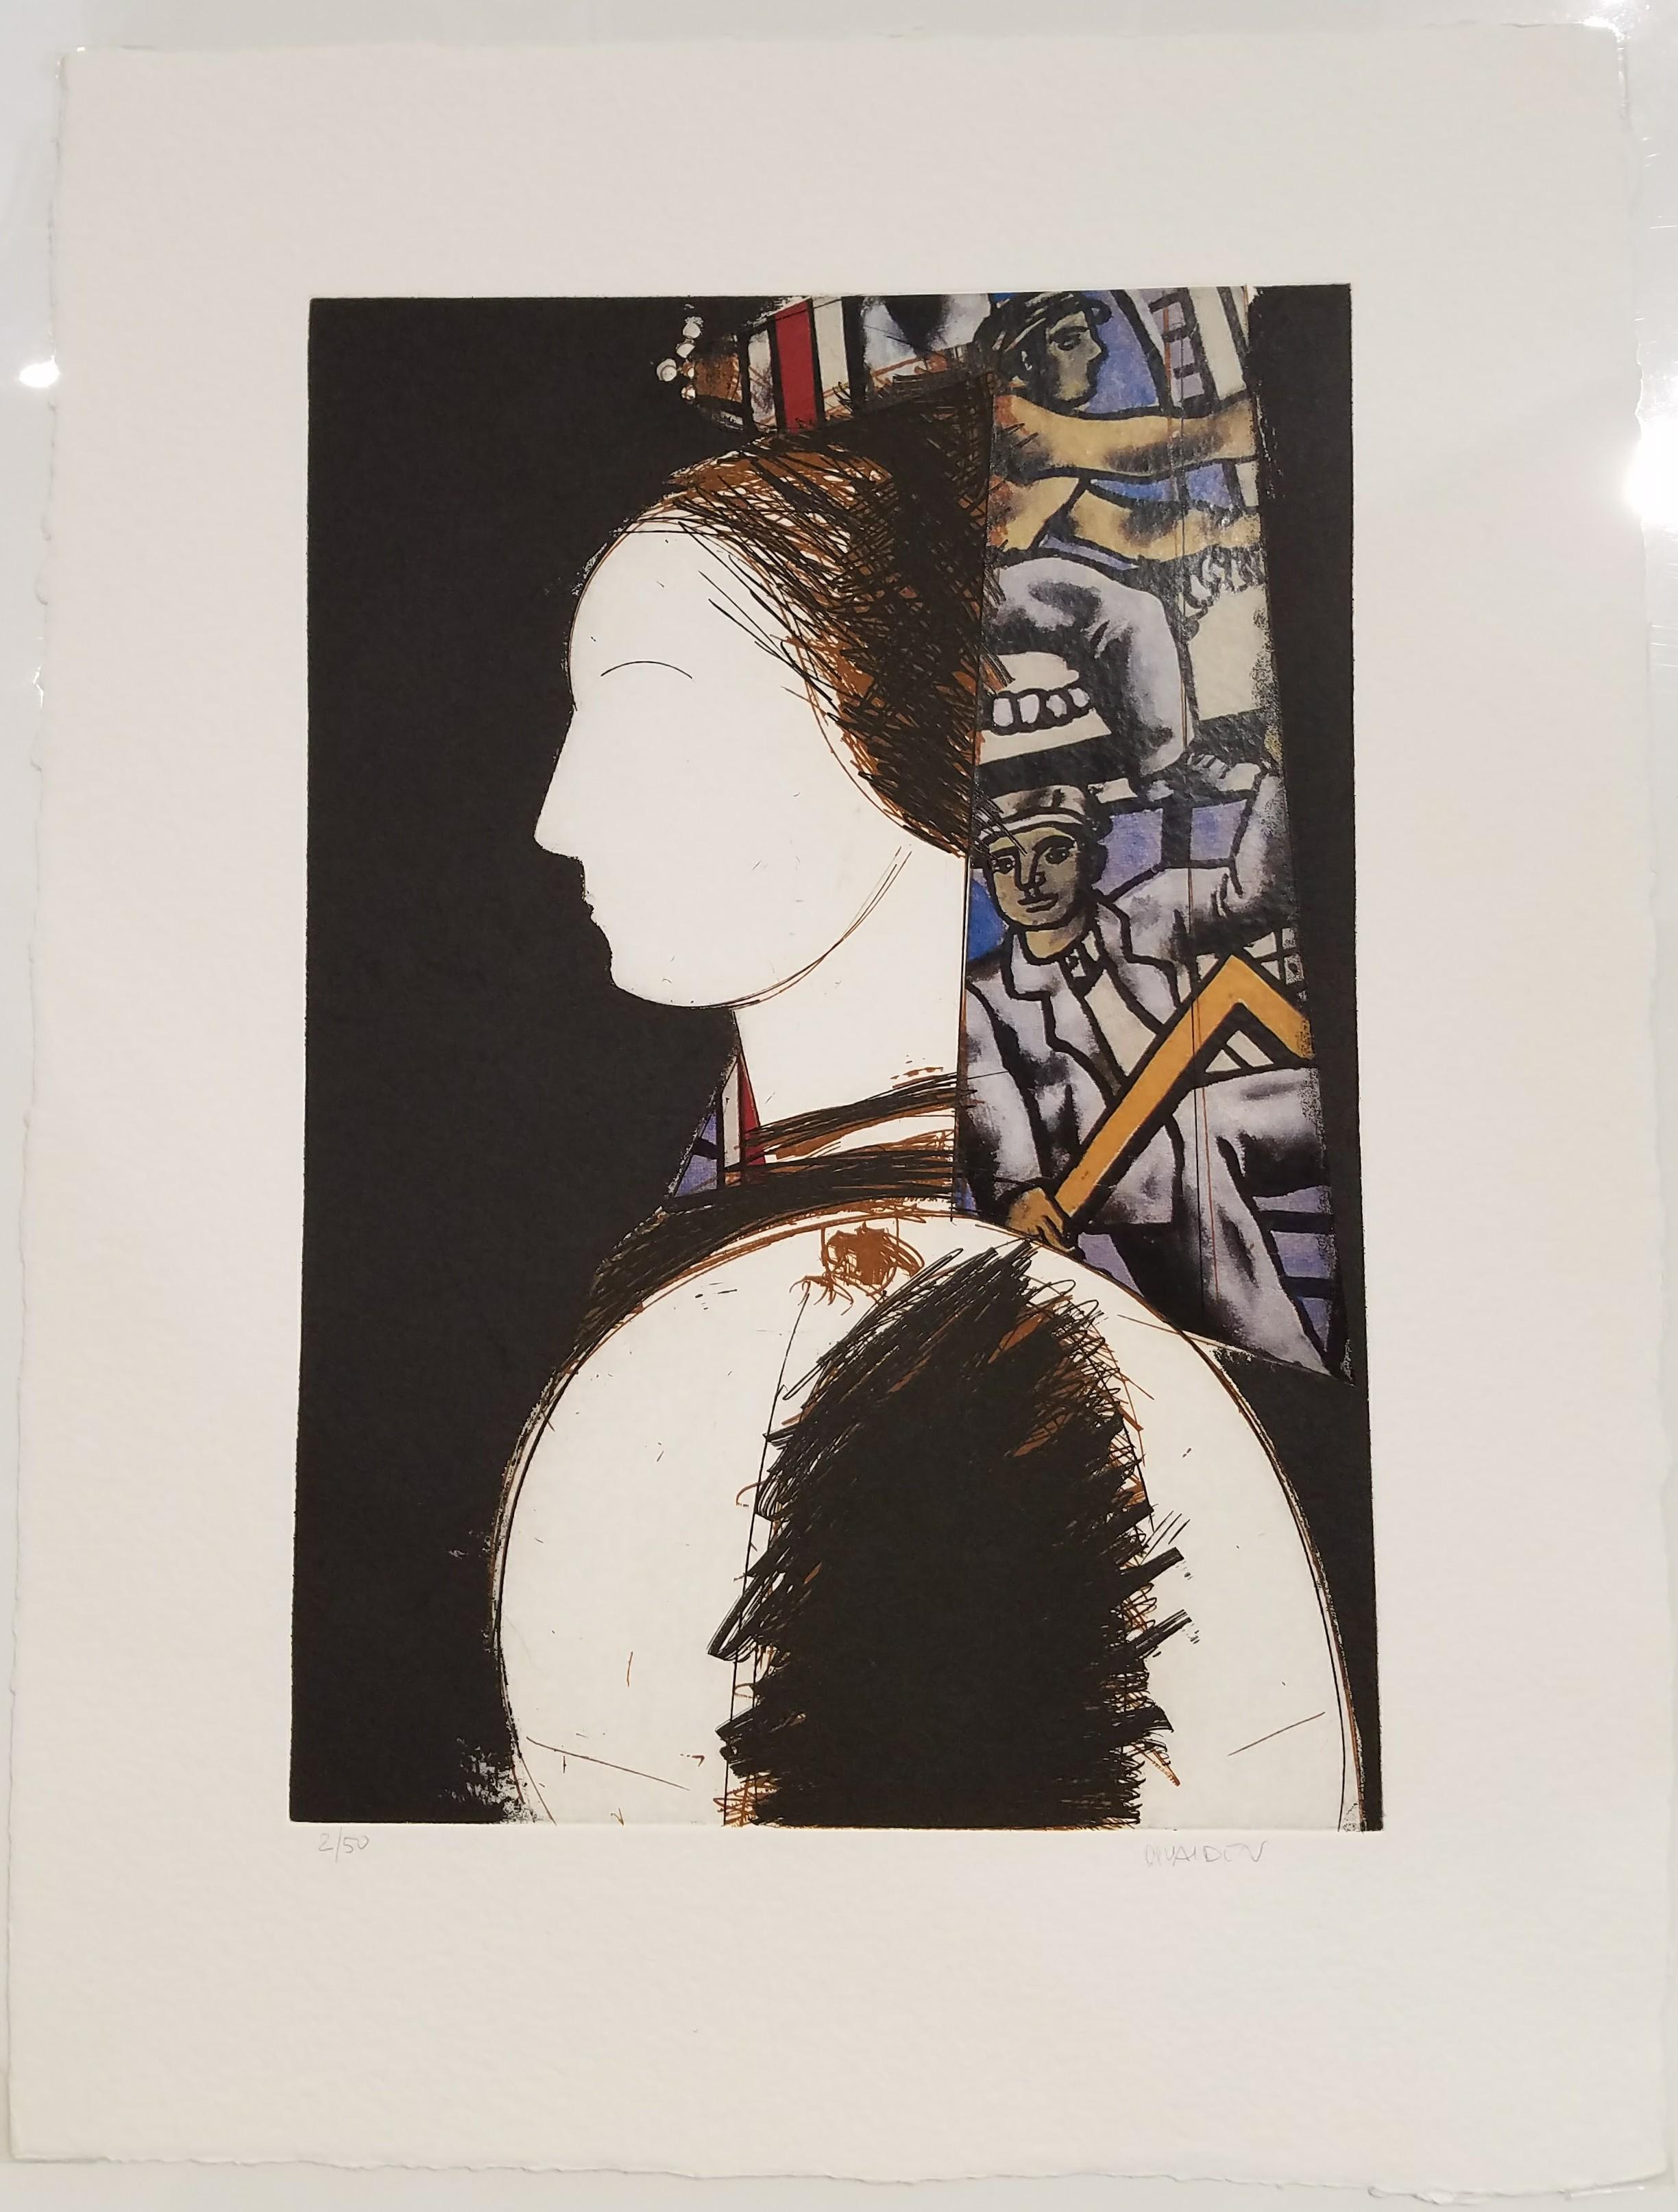 Beatrice II with Fernand Leger Unique Collage - Print by Manolo Valdes